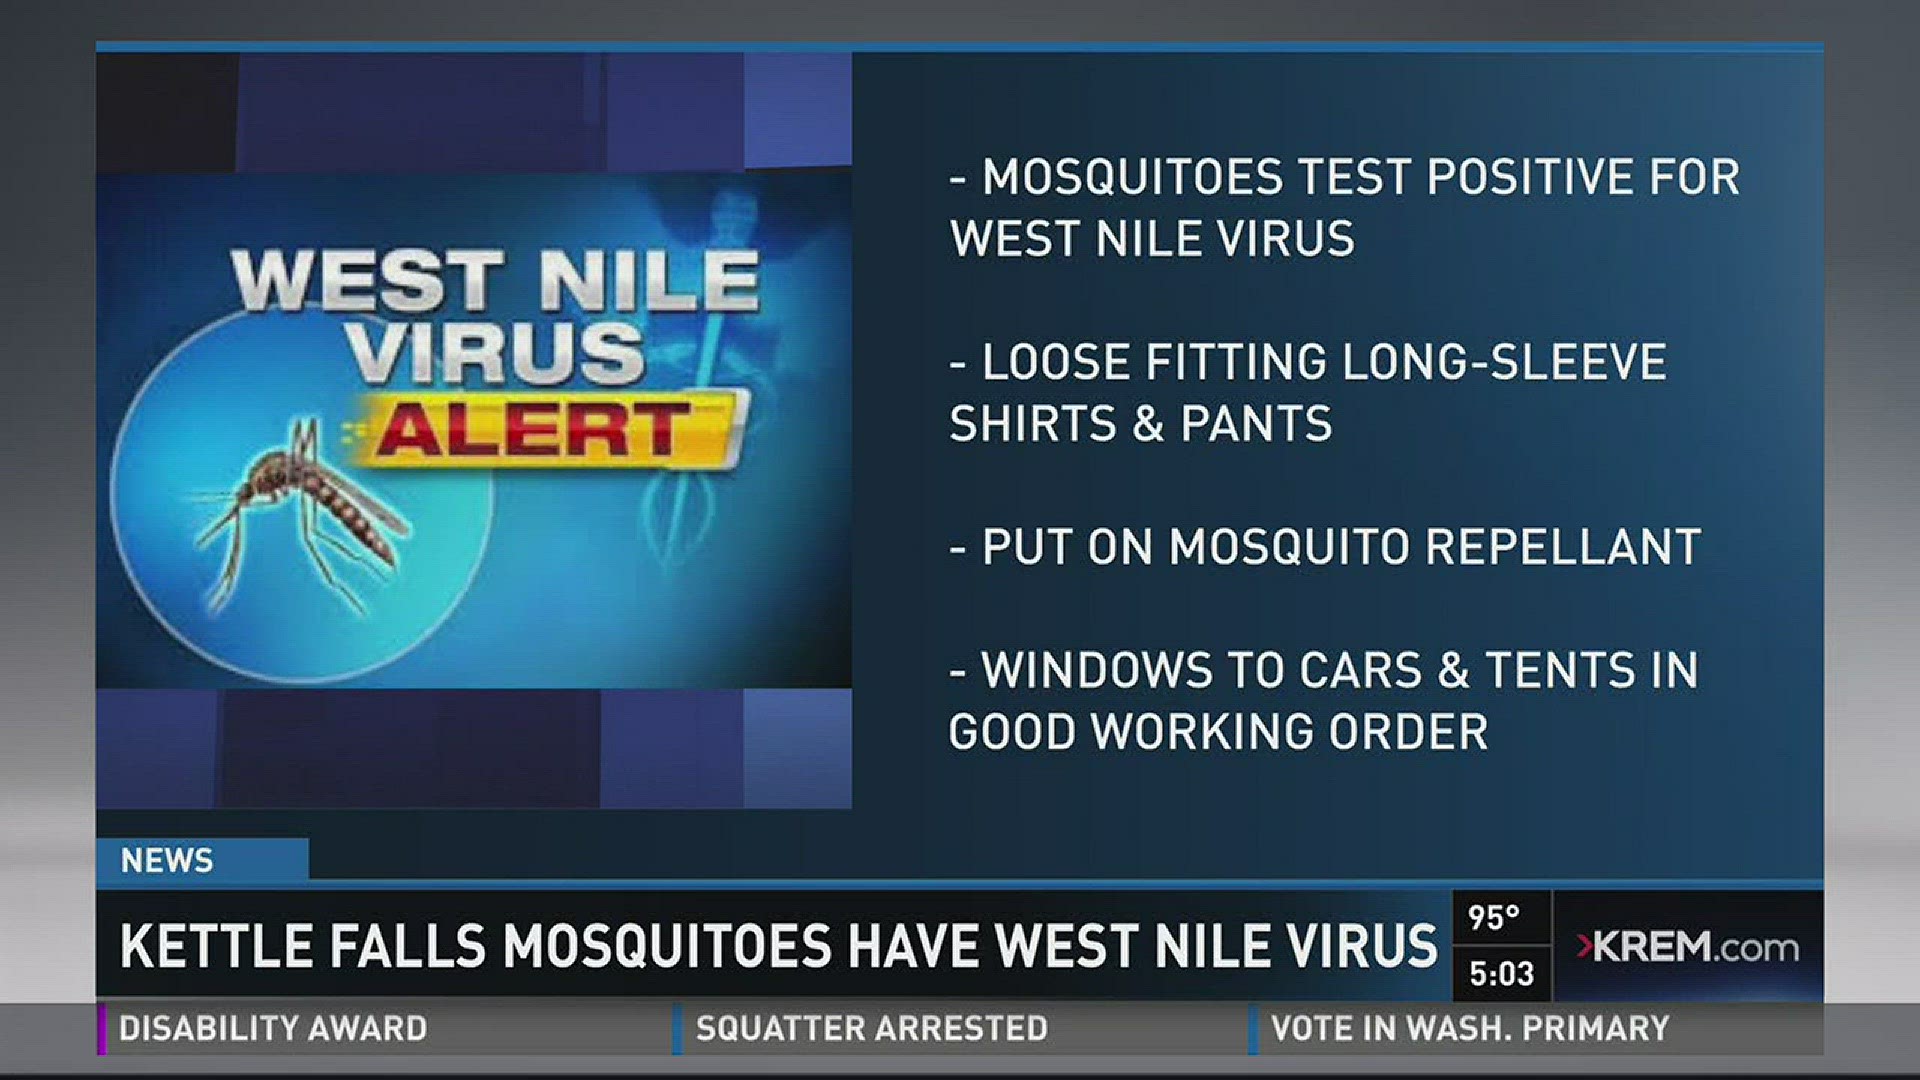 Mosquitos at Lake Roosevelt test positive for West Nile virus